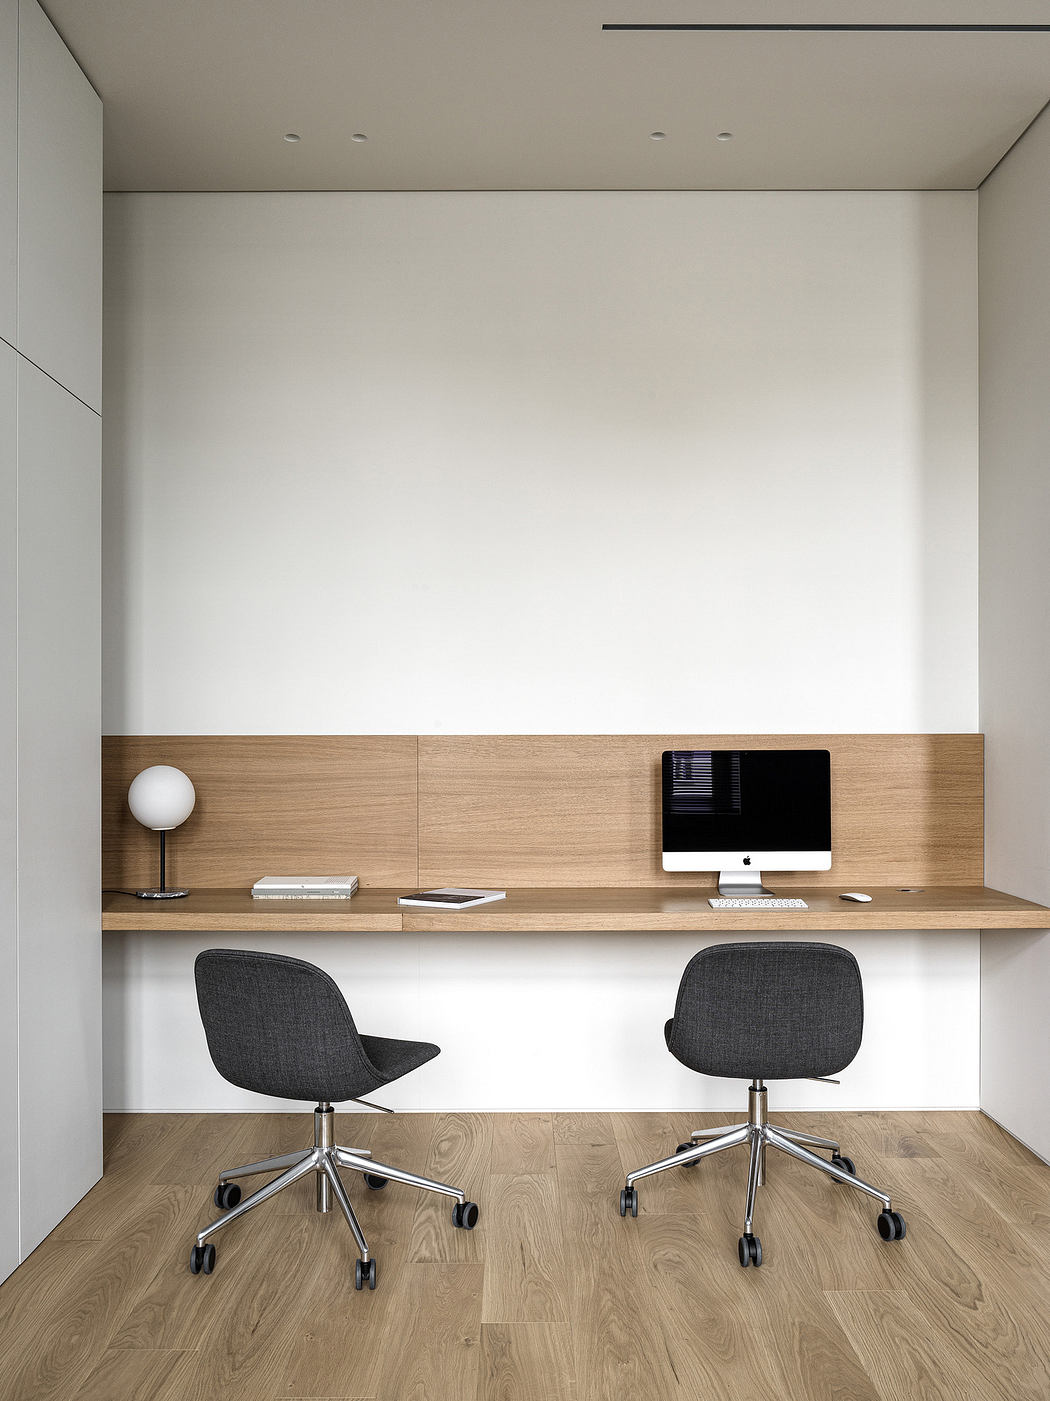 Minimalist home office with sleek wooden desk and two chairs.